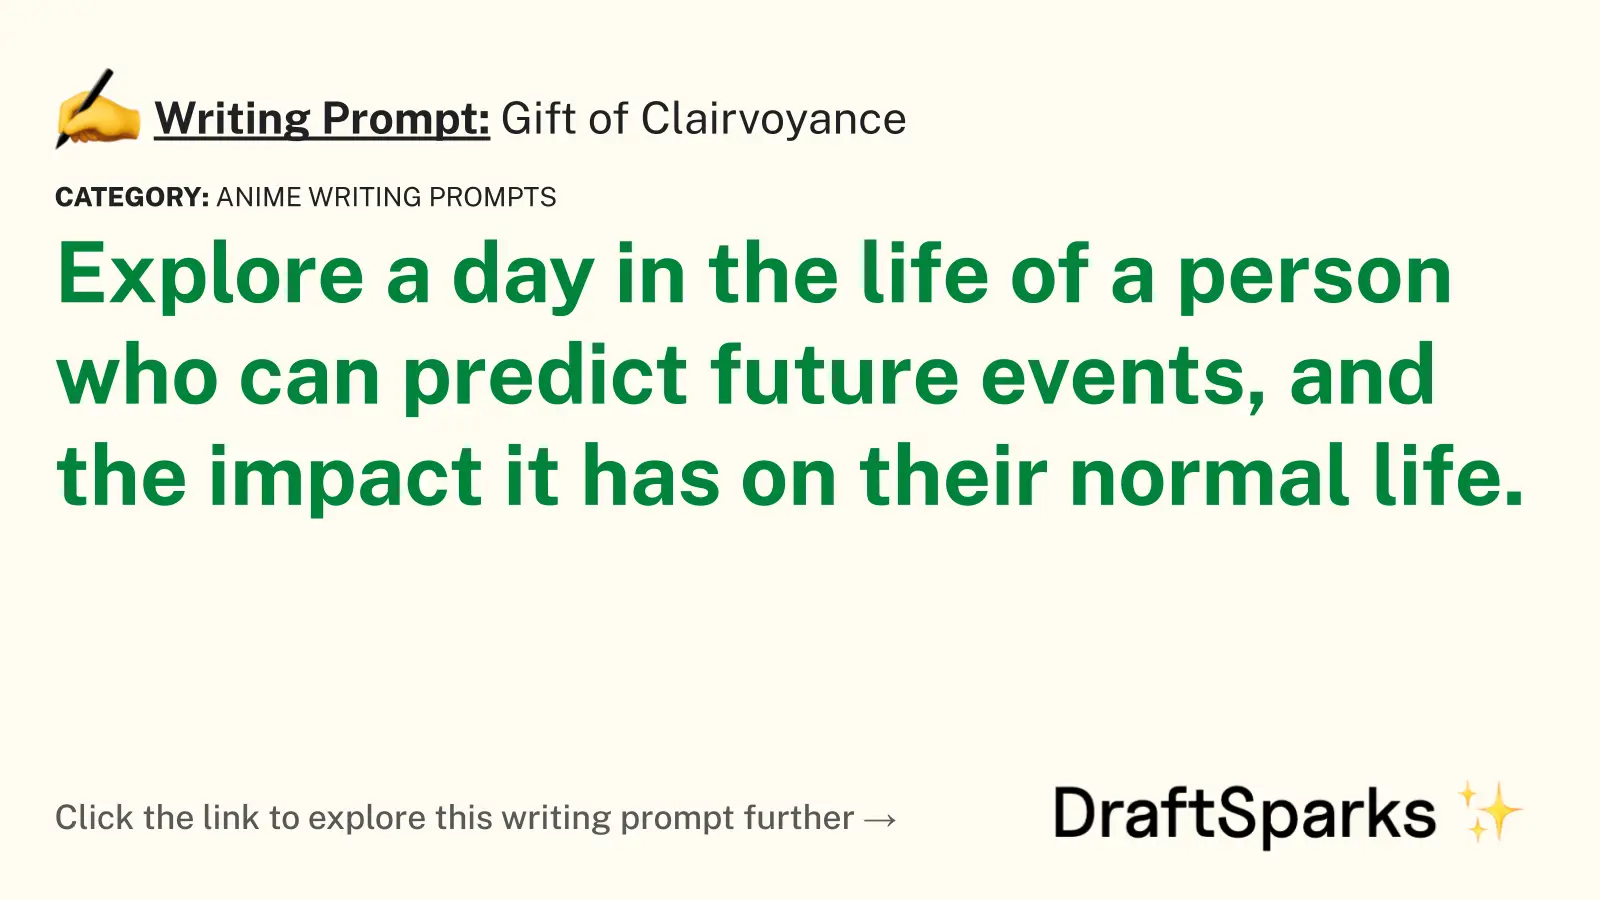 Gift of Clairvoyance